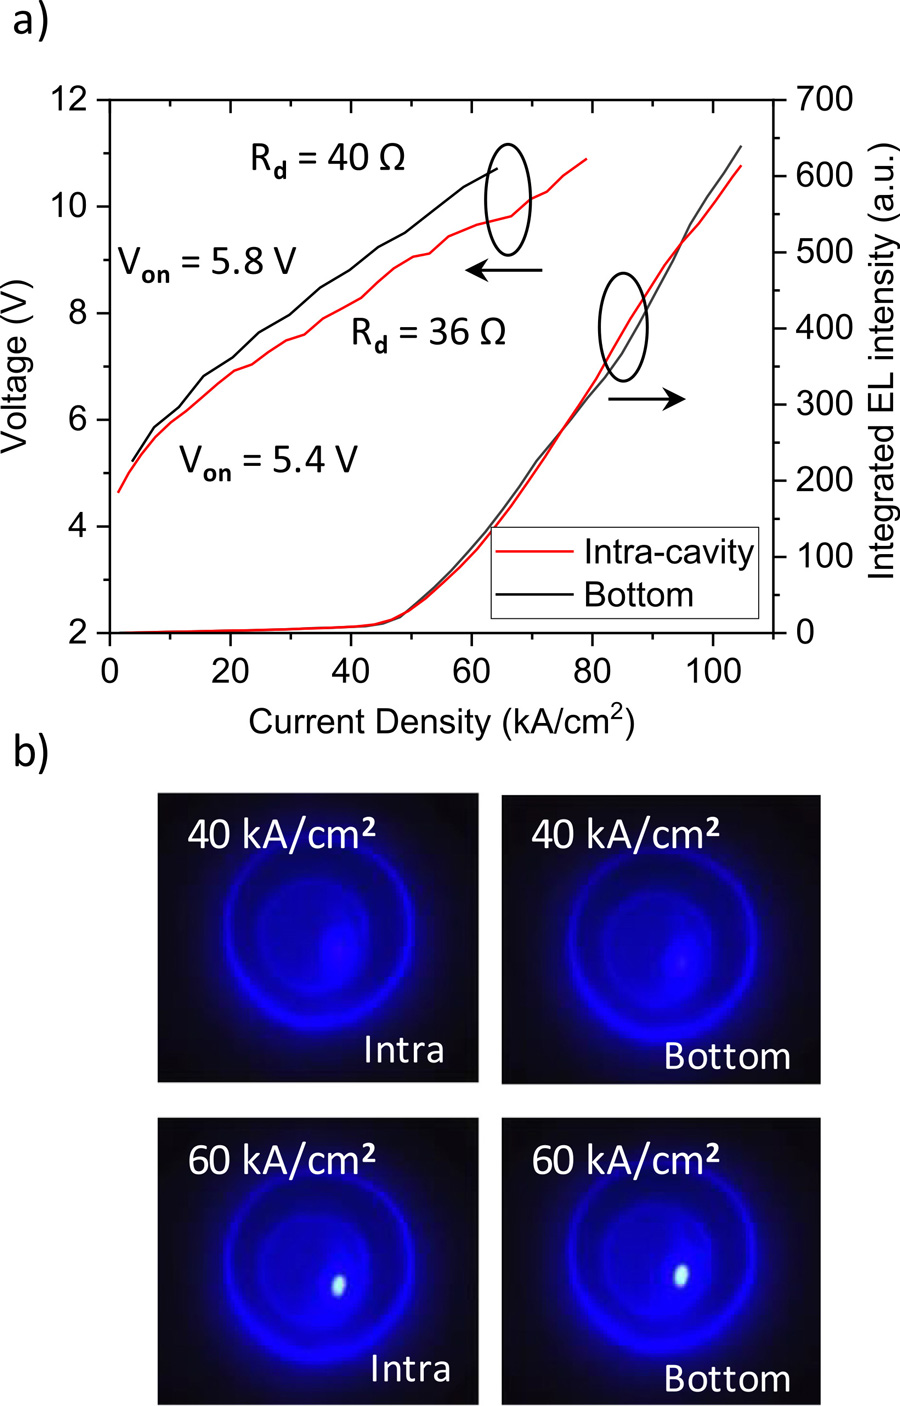 Figure 3: (a) Voltage and light output power versus current density of nanoporous GaN VCSEL through intracavity (red) and bottom (black) injection. (b) Near-field images of aperture below (40kA/cm2) and above (60kA/cm2) lasing threshold from intracavity (left) and bottom (right) injection. 